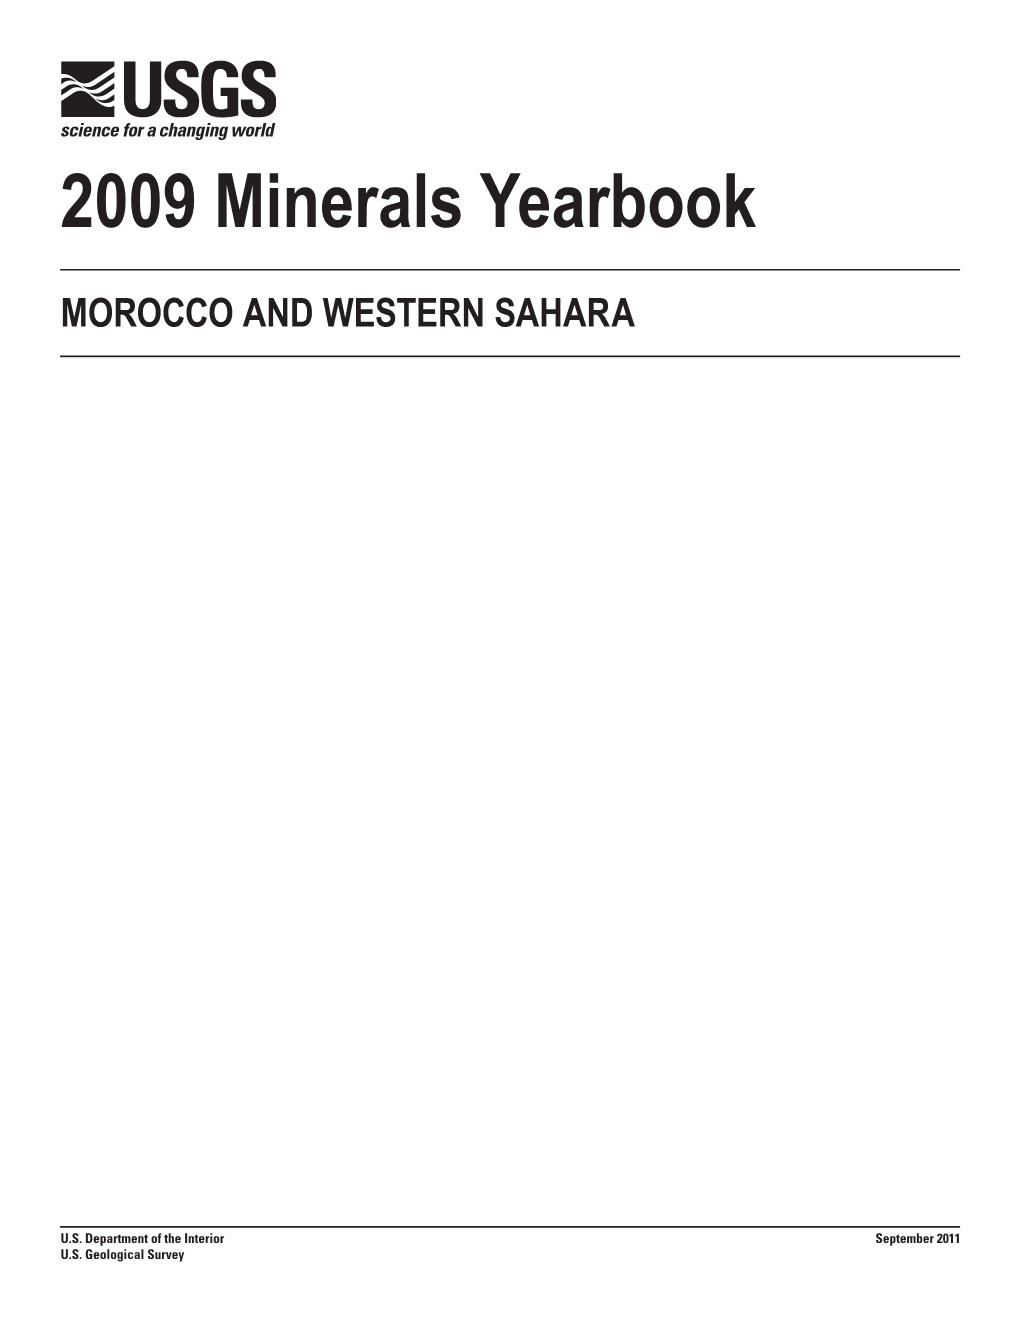 The Mineral Industries of Morocco and Western Sahara in 2009